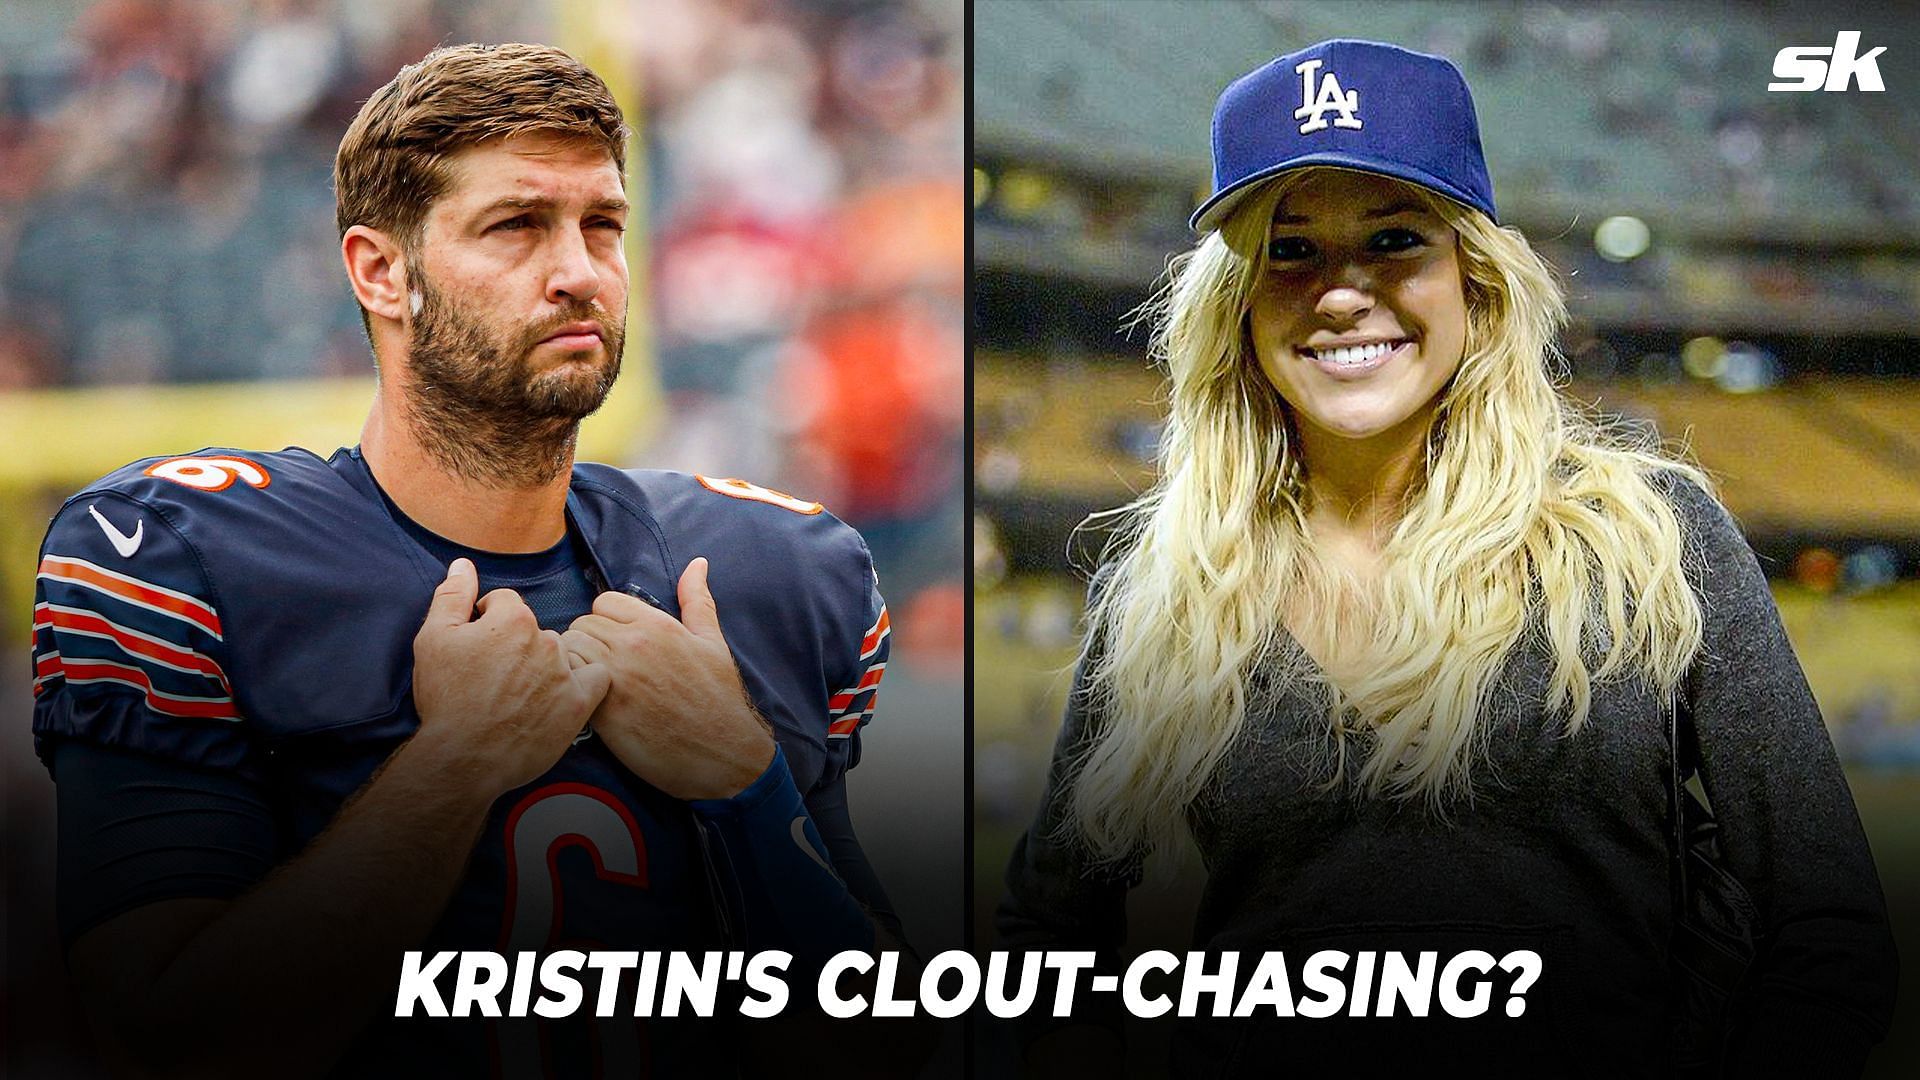 Jay Cutler and his wife got divorced more than two years ago